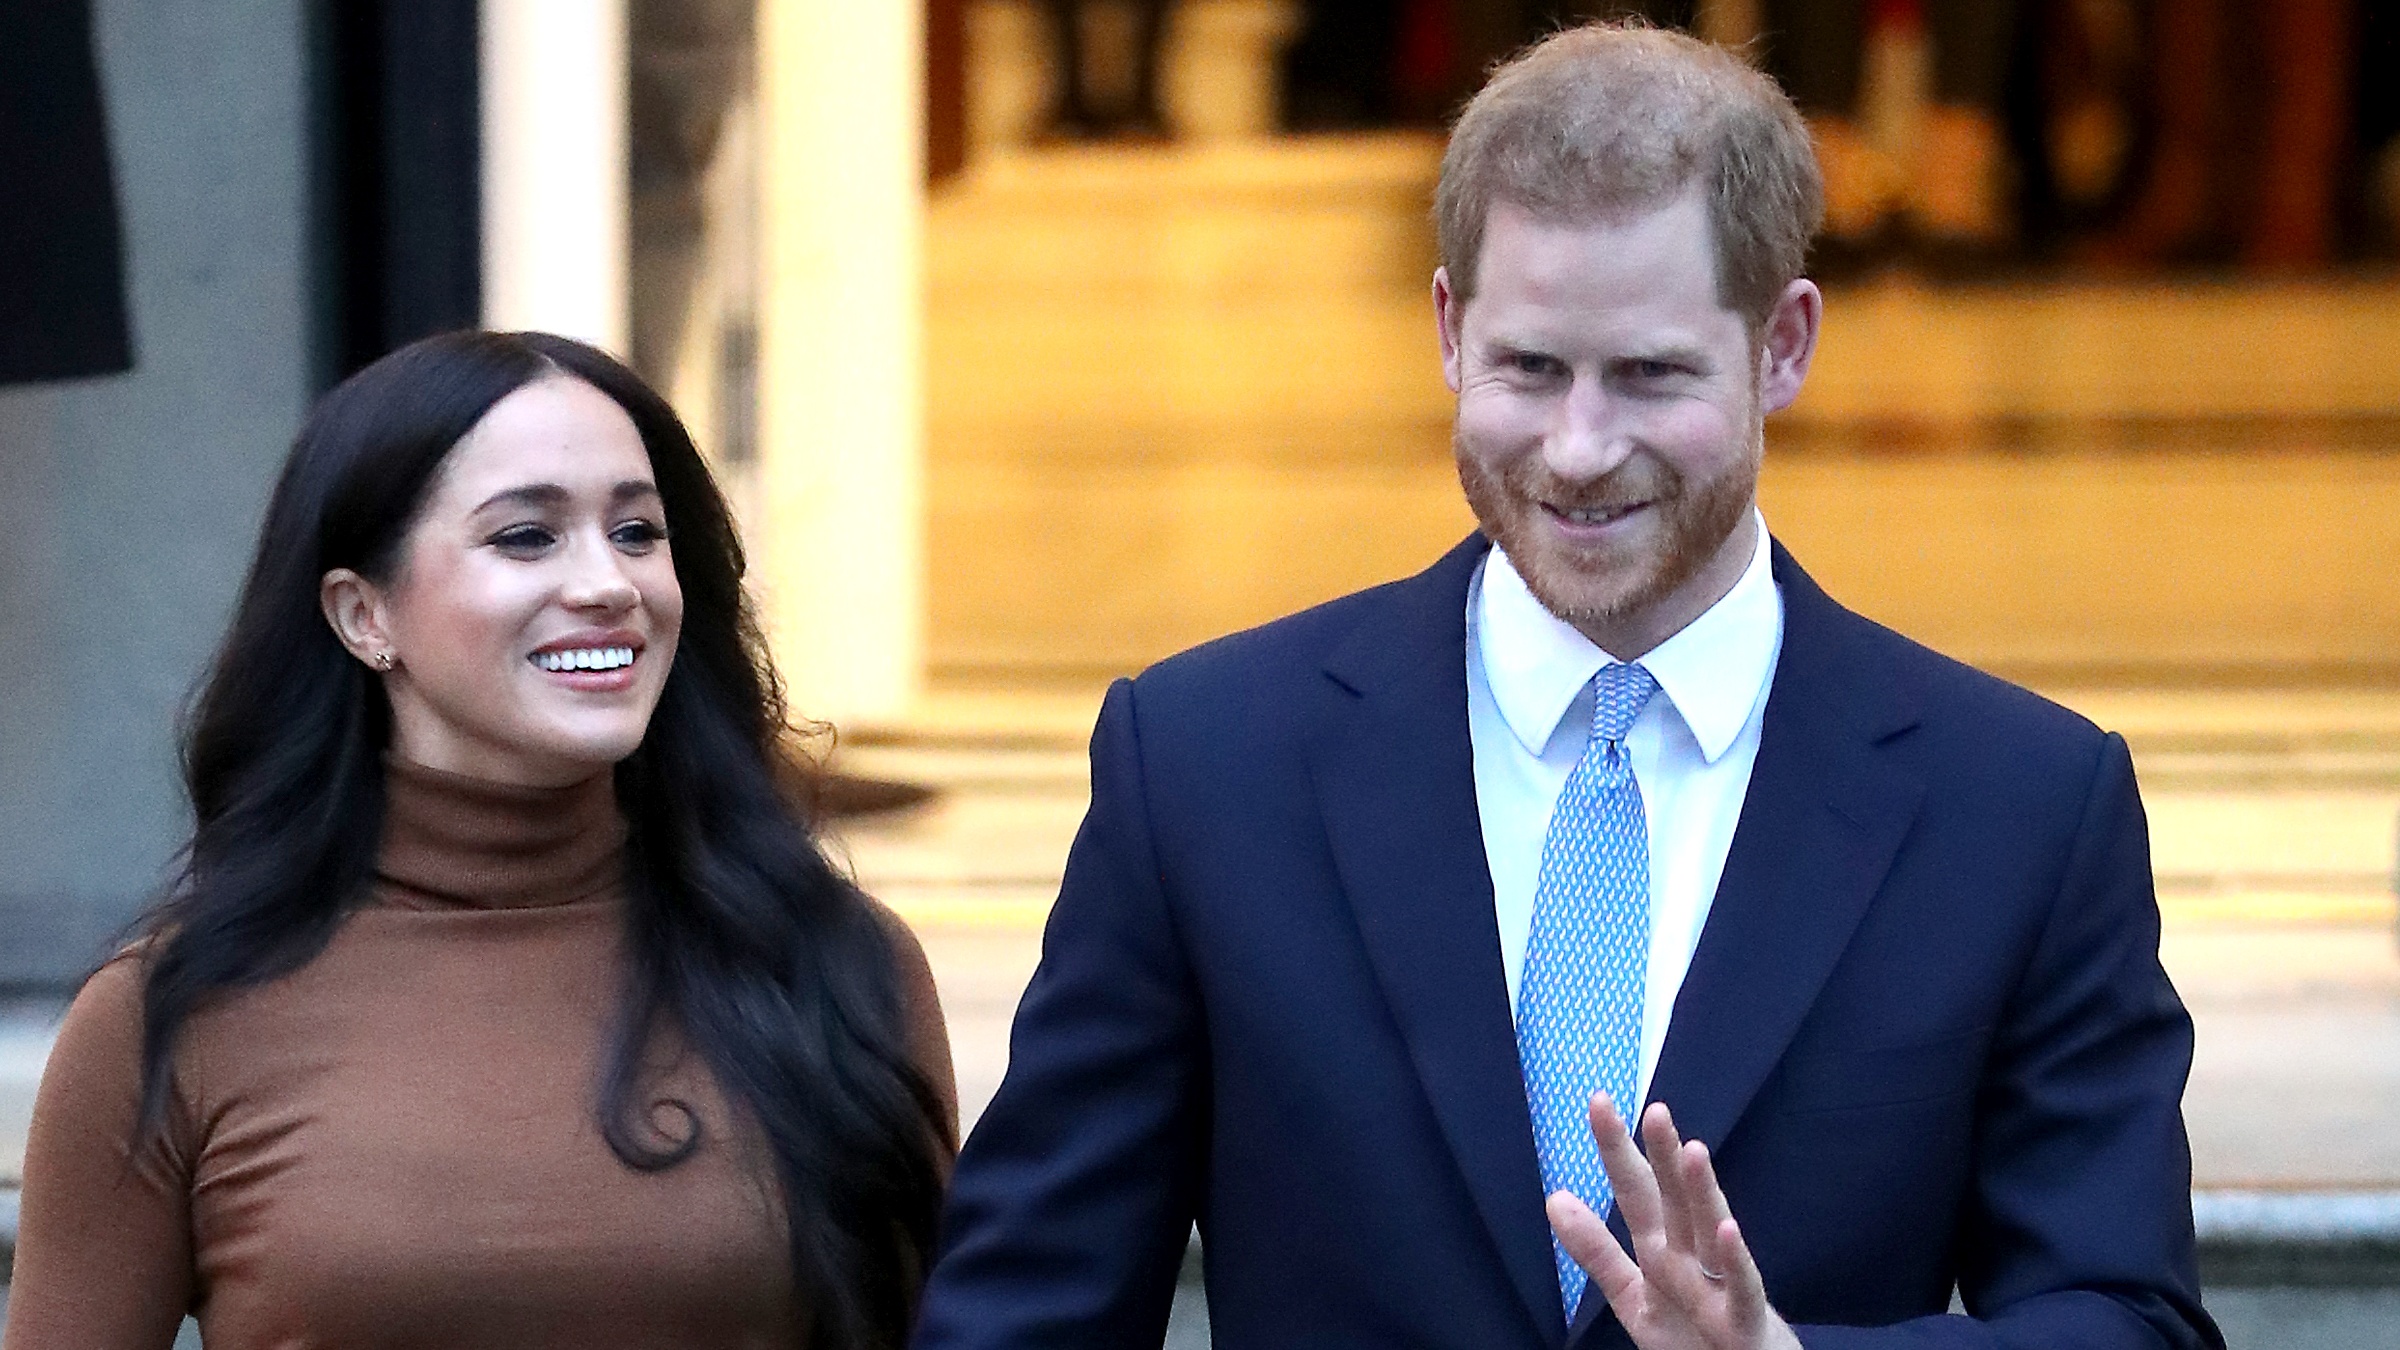 Meghan Markle and Prince Harry on a visit to Canada House, London.